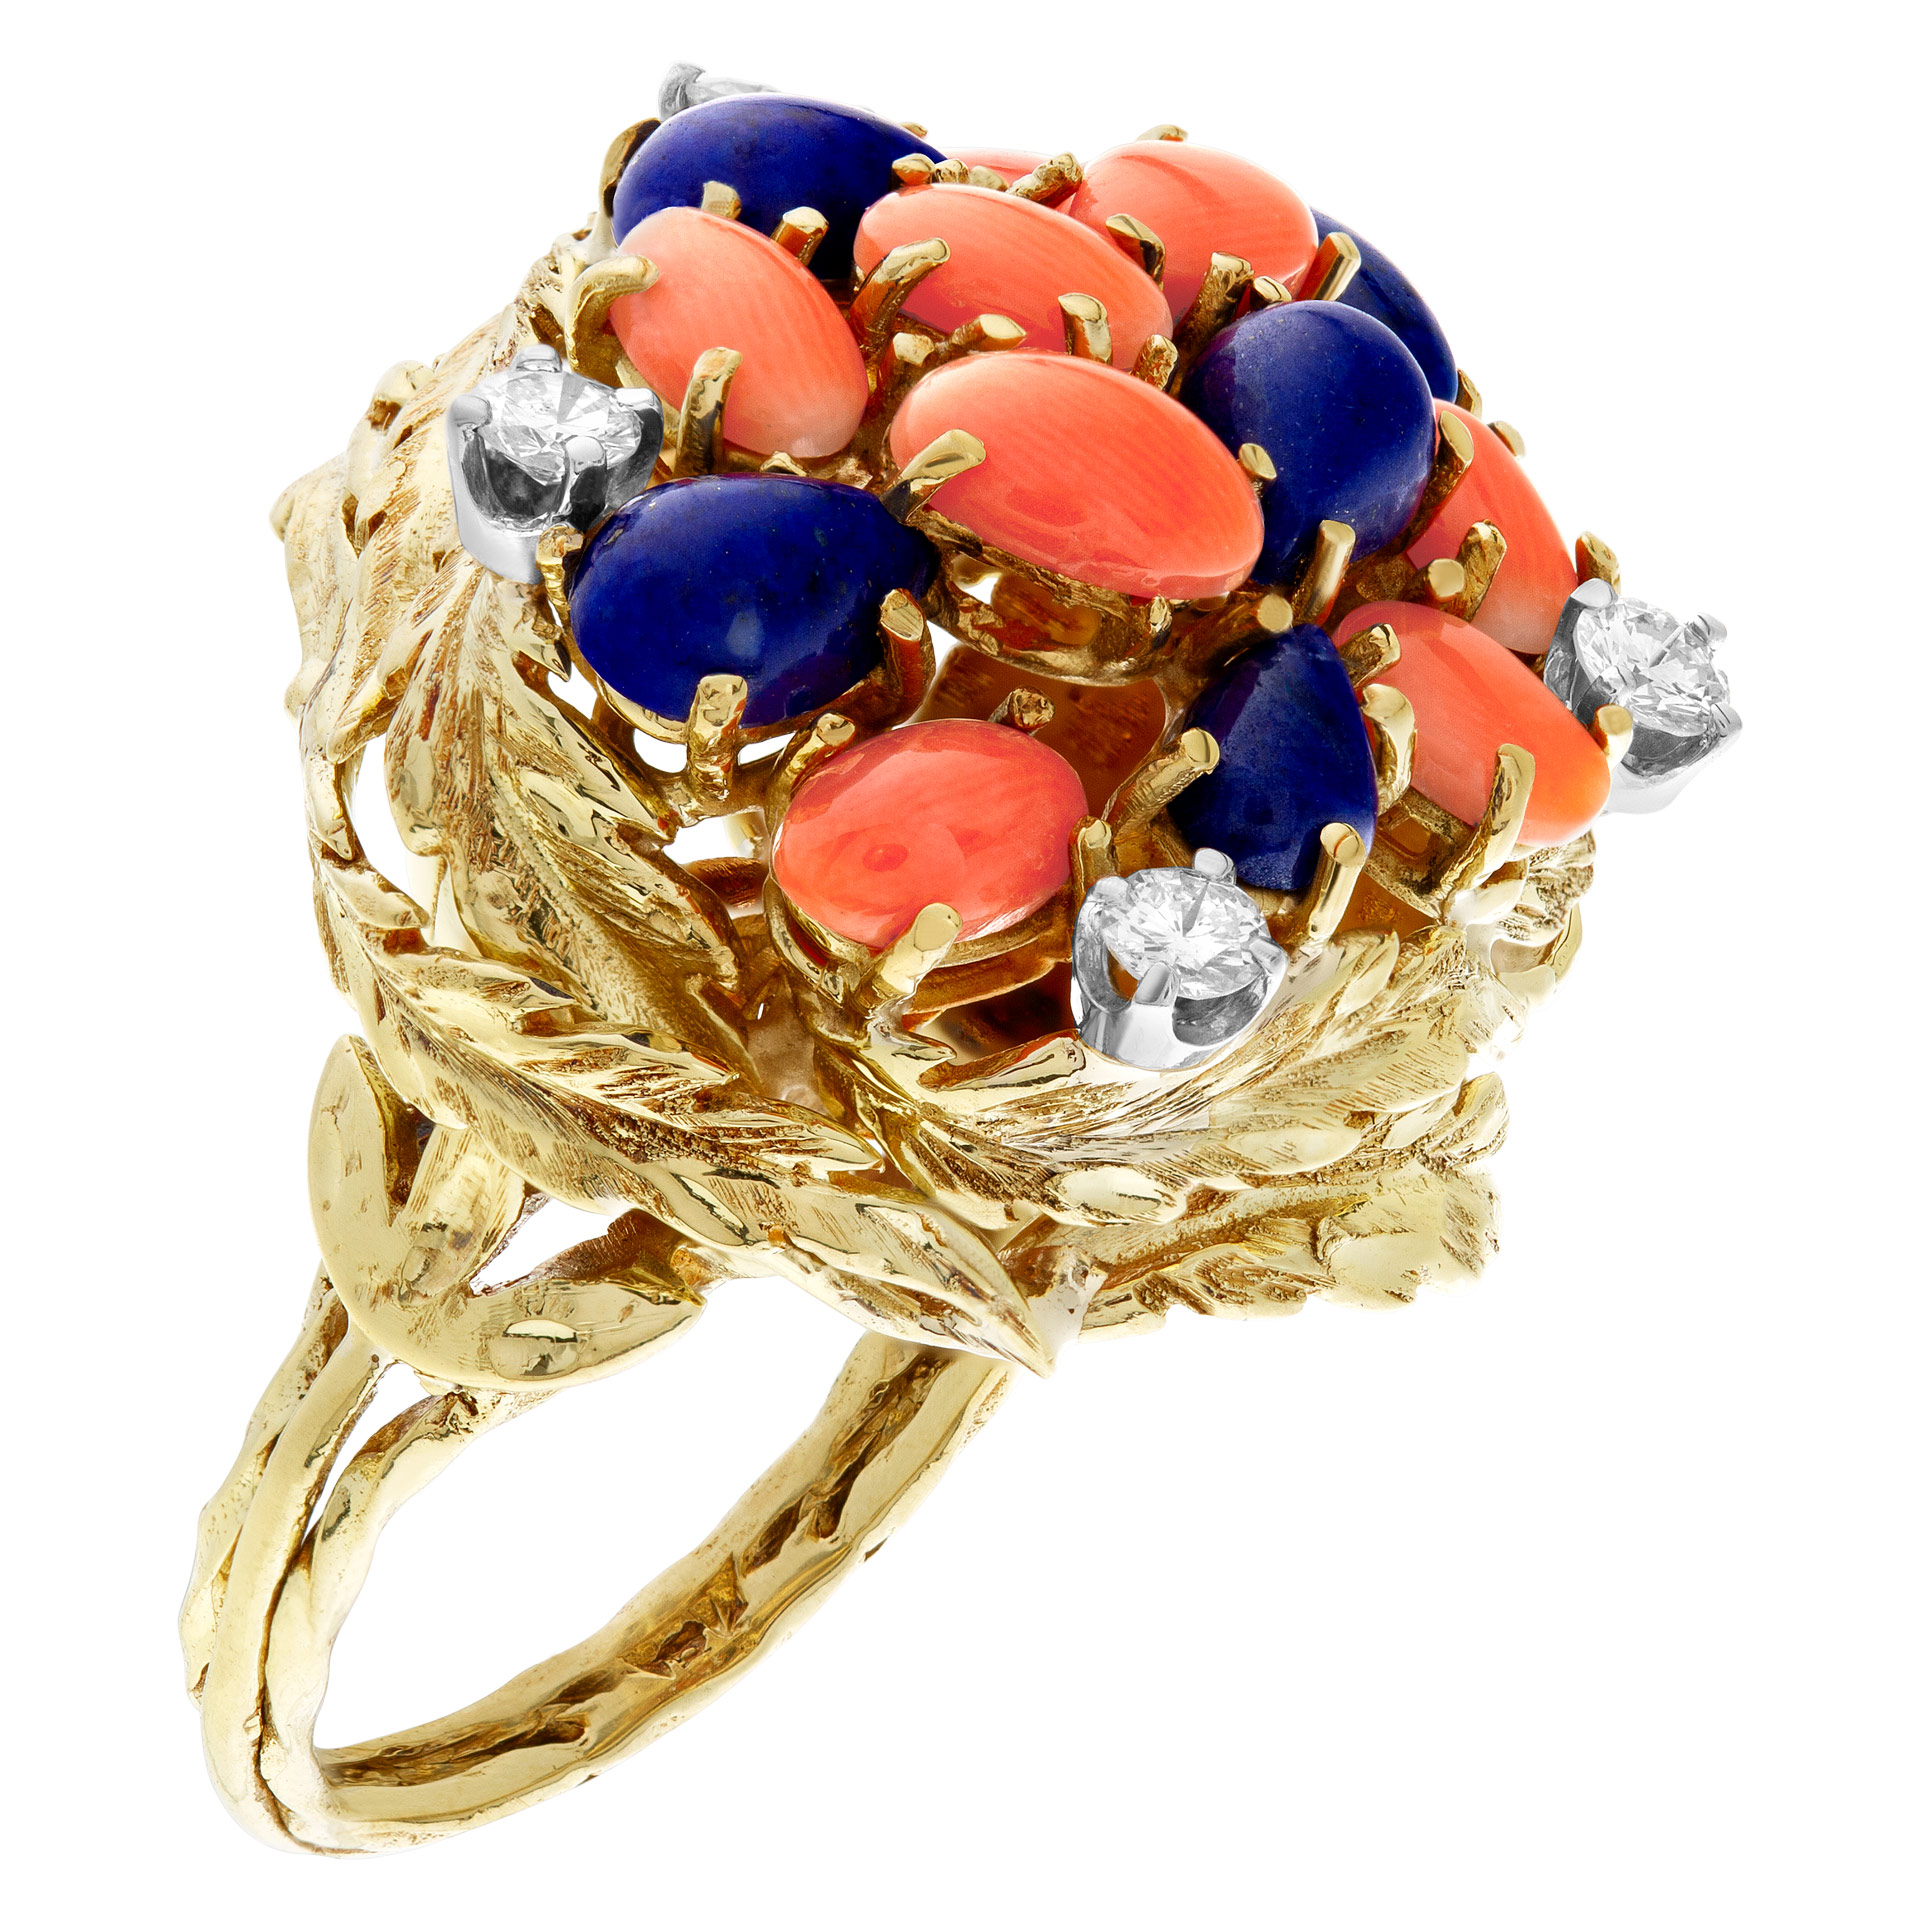 Lapiz lazuli & coral garden ring in 18k yellow gold with diamond accents image 2